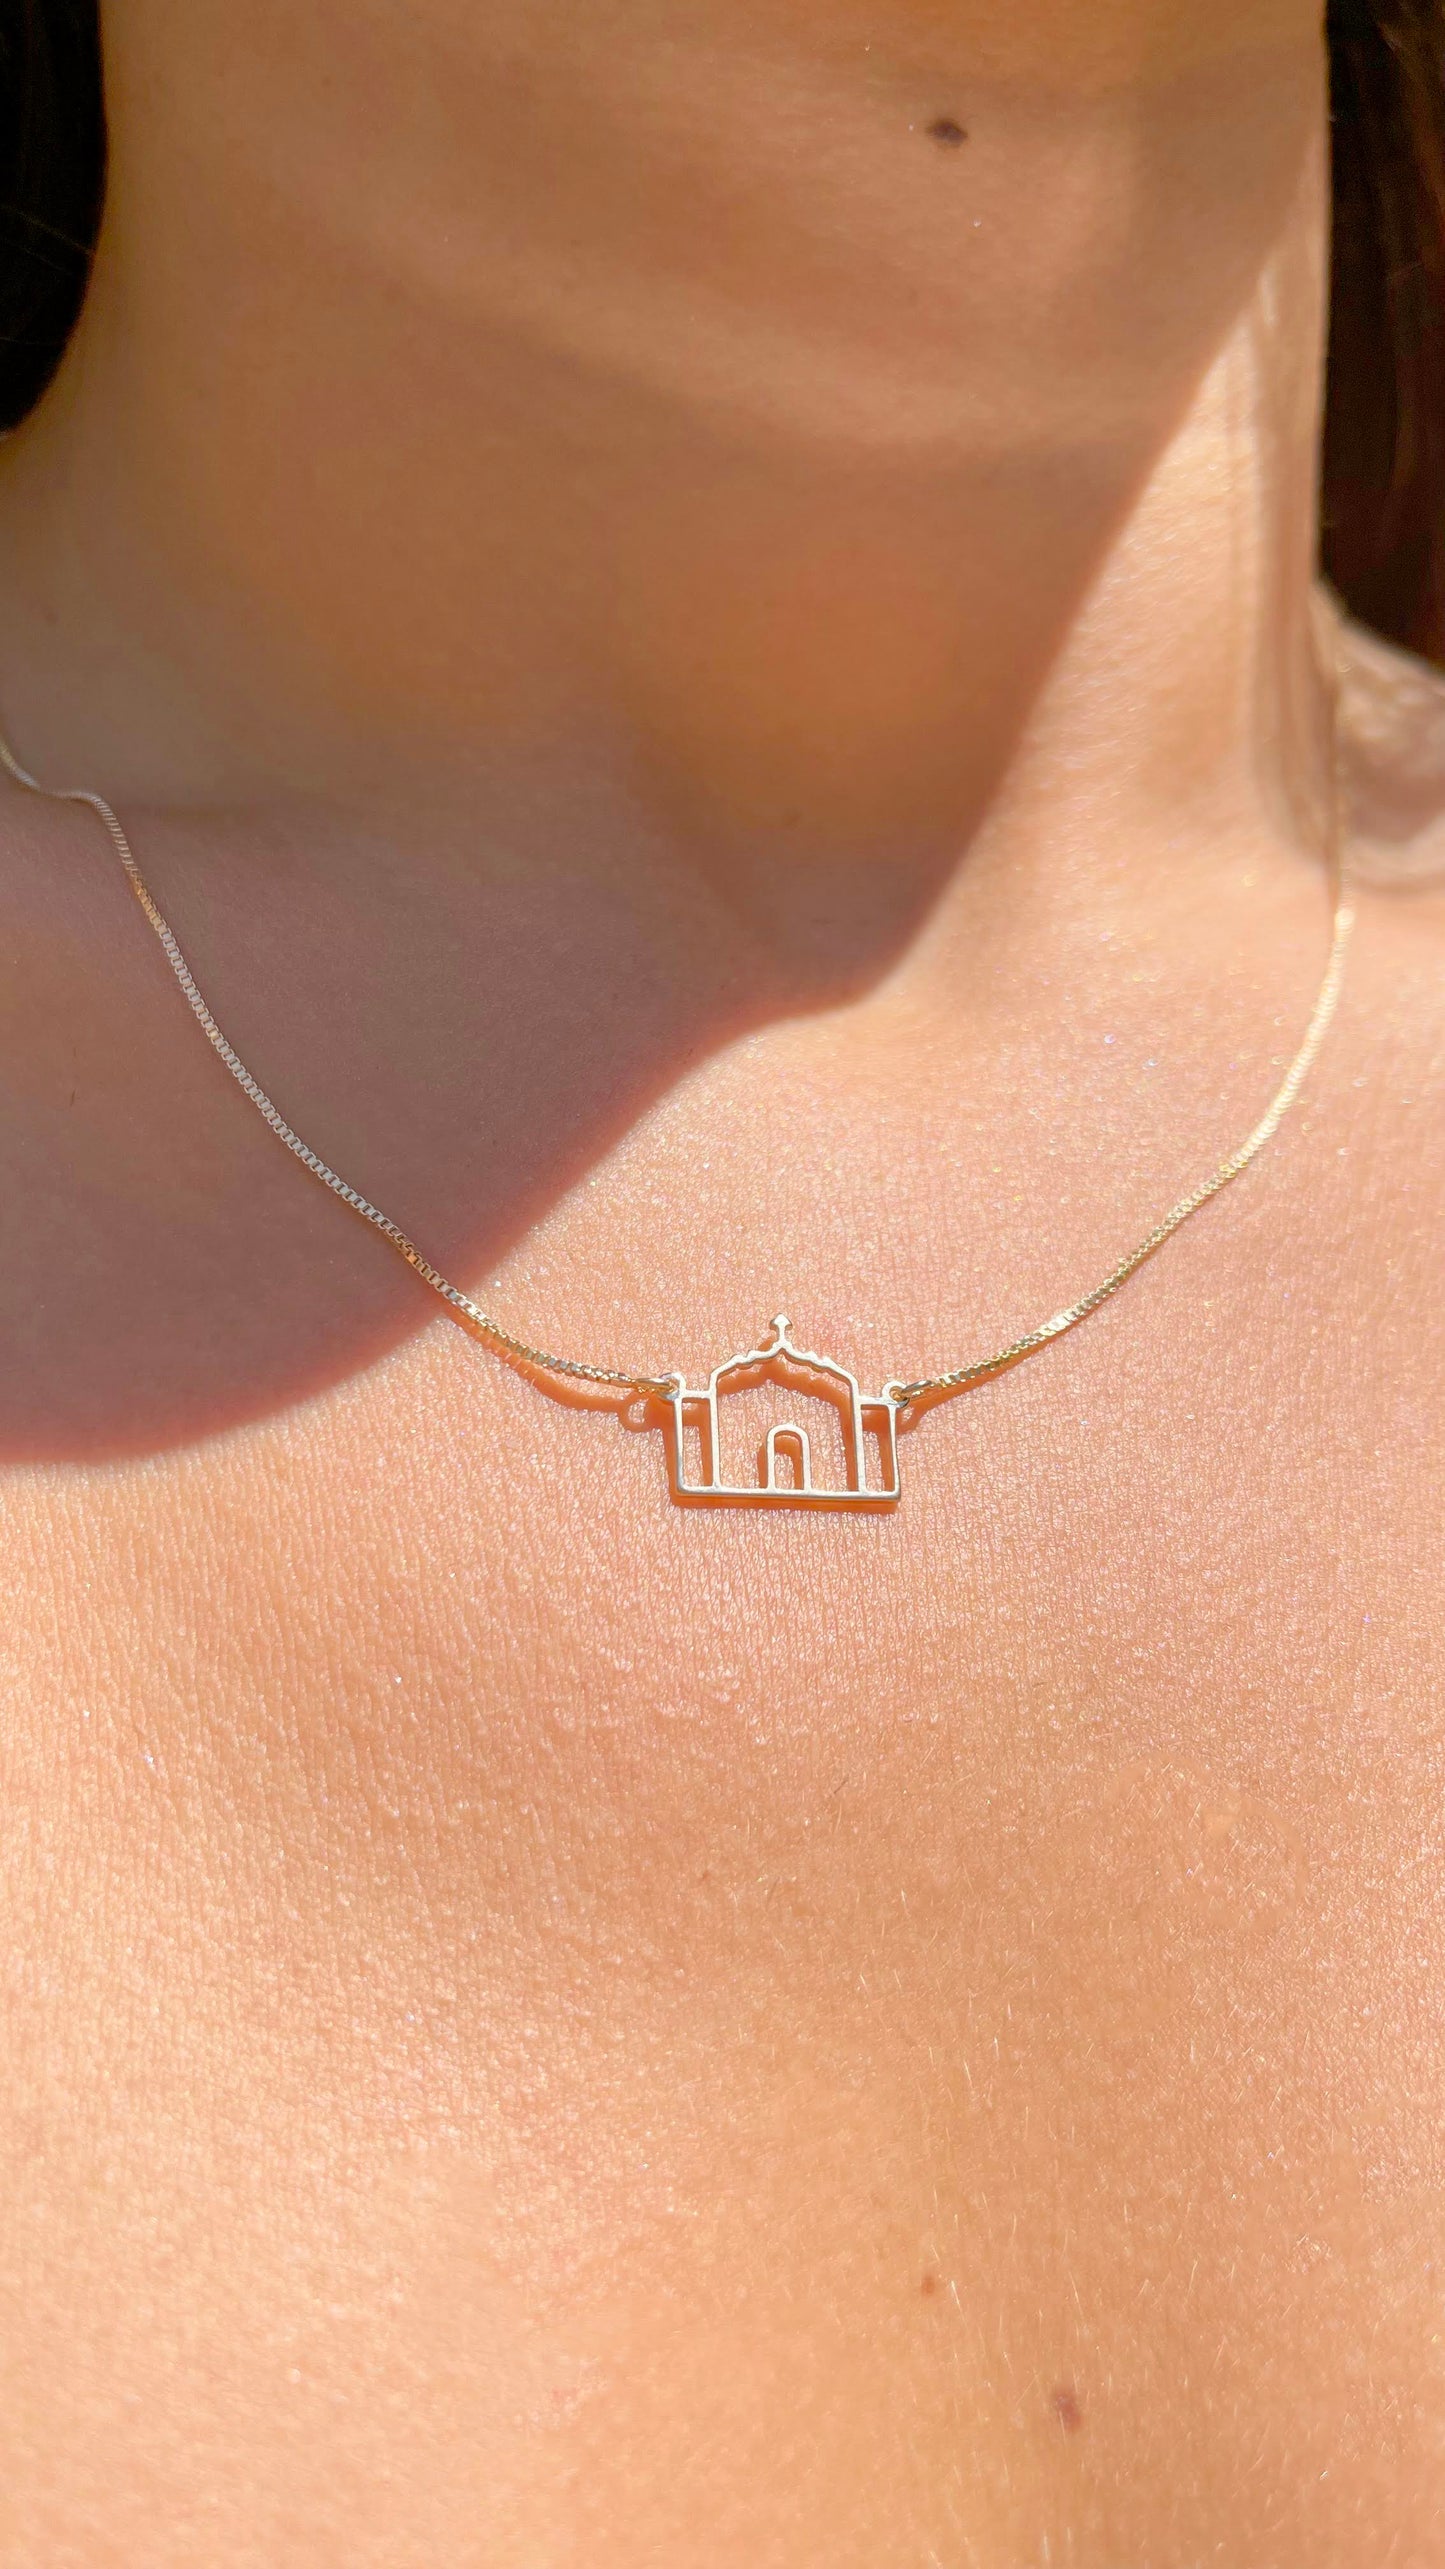 Church shaped necklace in 18K gold plating